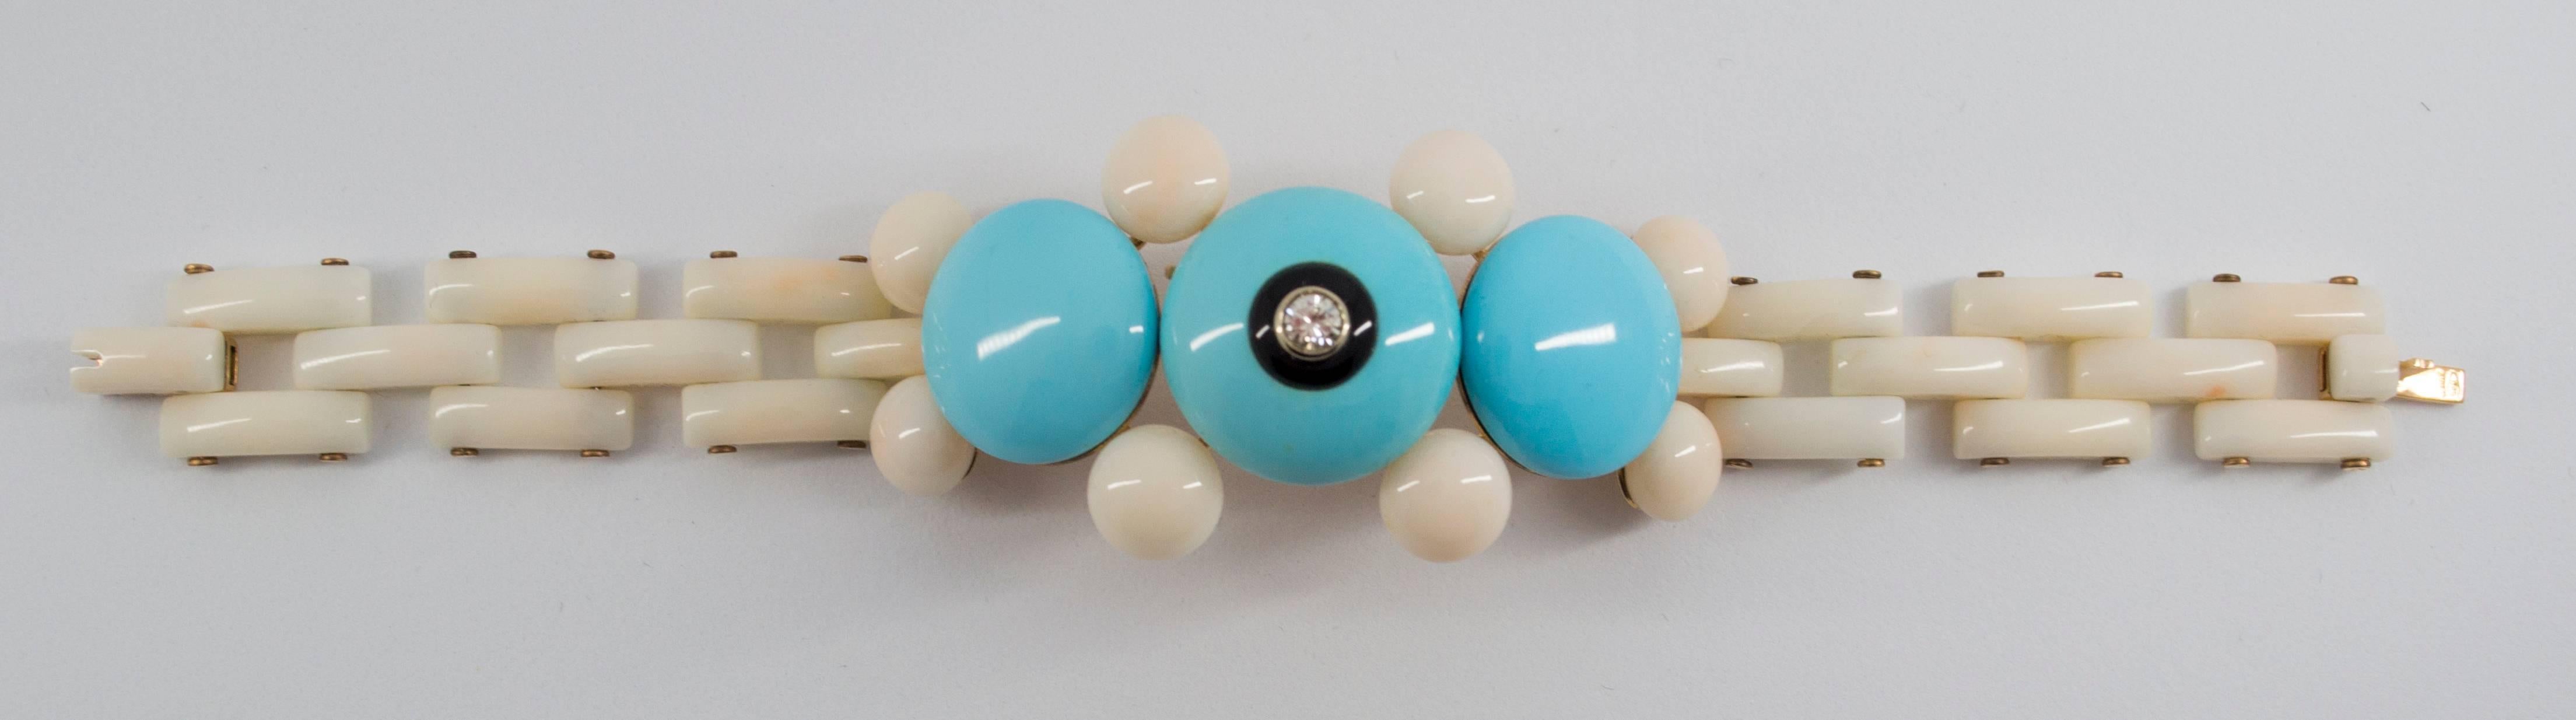 This Bracelet is made of 14K Yellow Gold.
This Bracelet has Onyx, White Coral and Turquoise.
This bracelet has a 0.20 Carats Diamond.
We're a workshop so every piece is handmade, customizable and resizable.